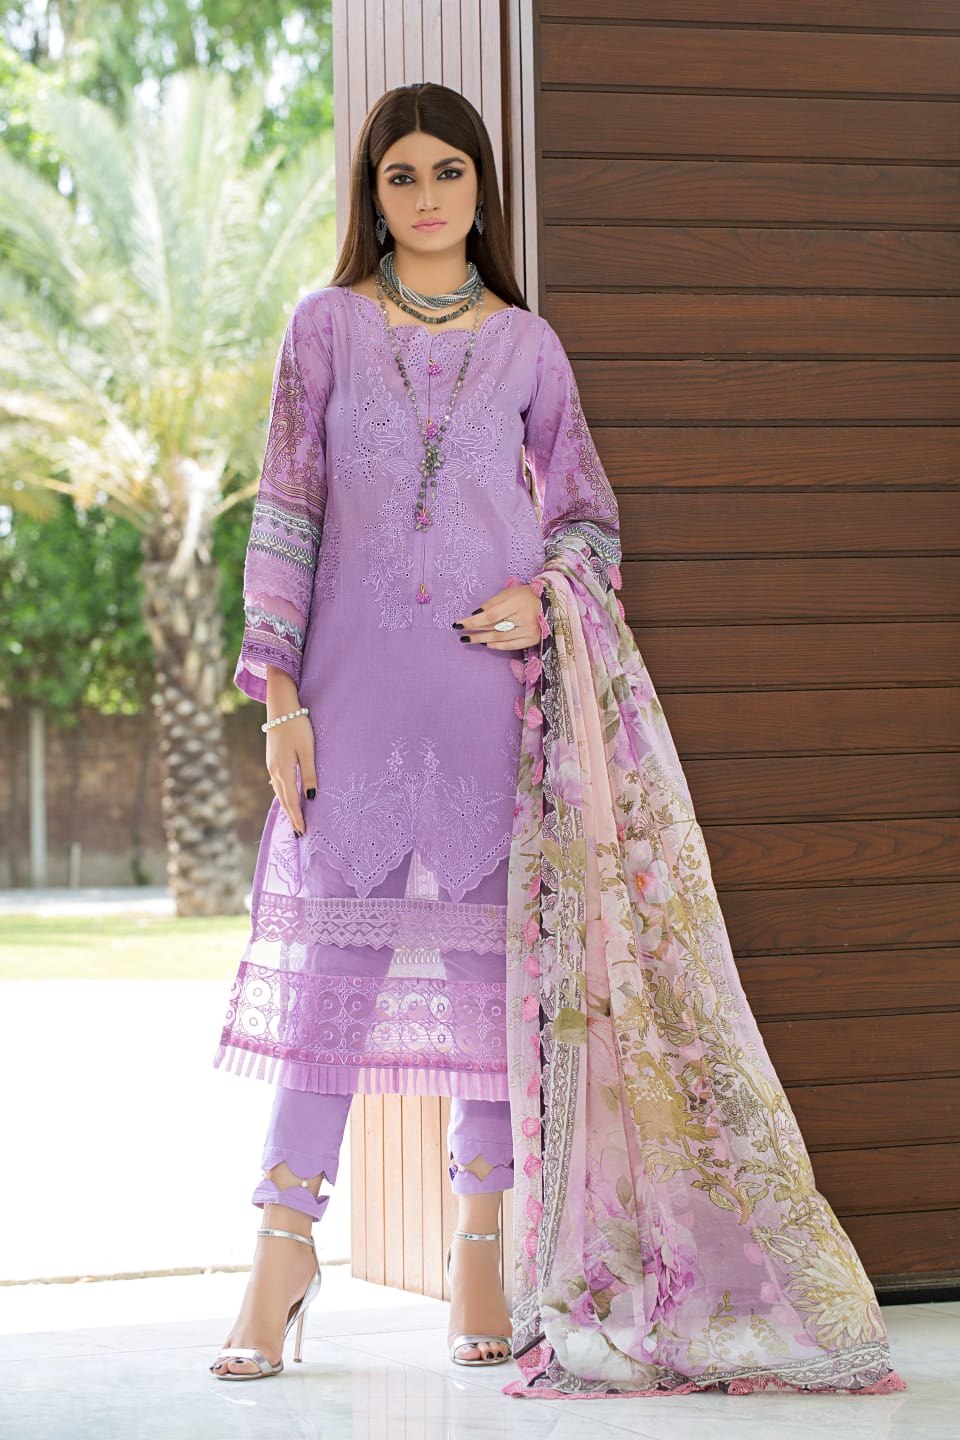 Noorjahan by Mausummery 3pc Embroided collection bamboo A